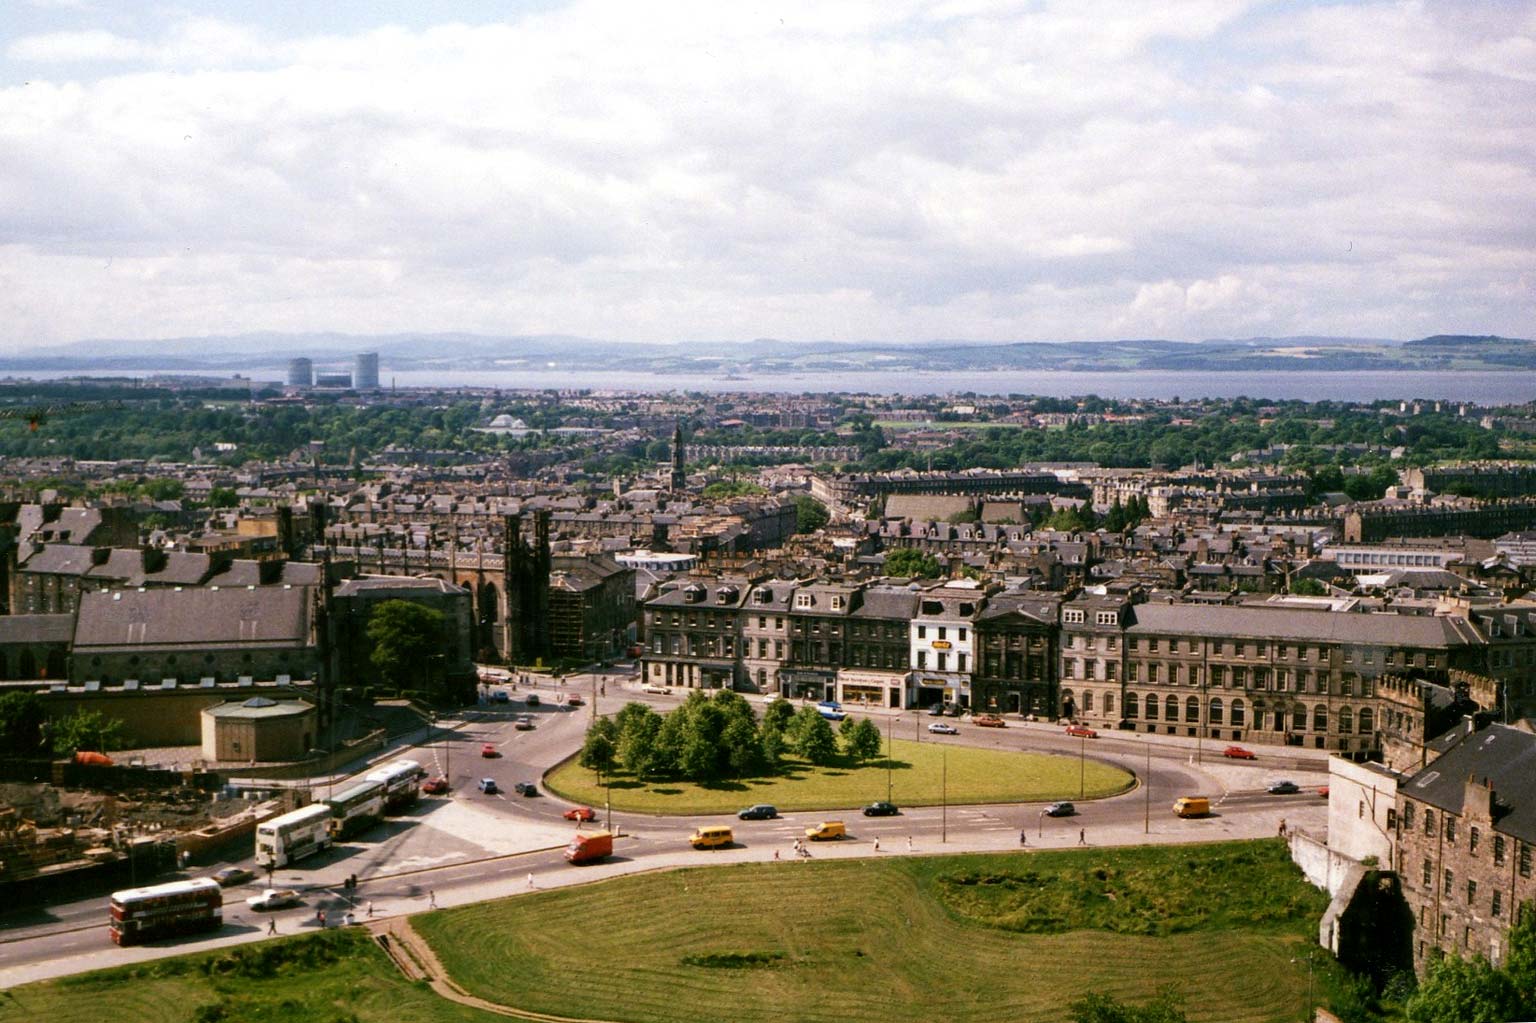 Traffic Roundabout at Picardy Place - mid-1980s